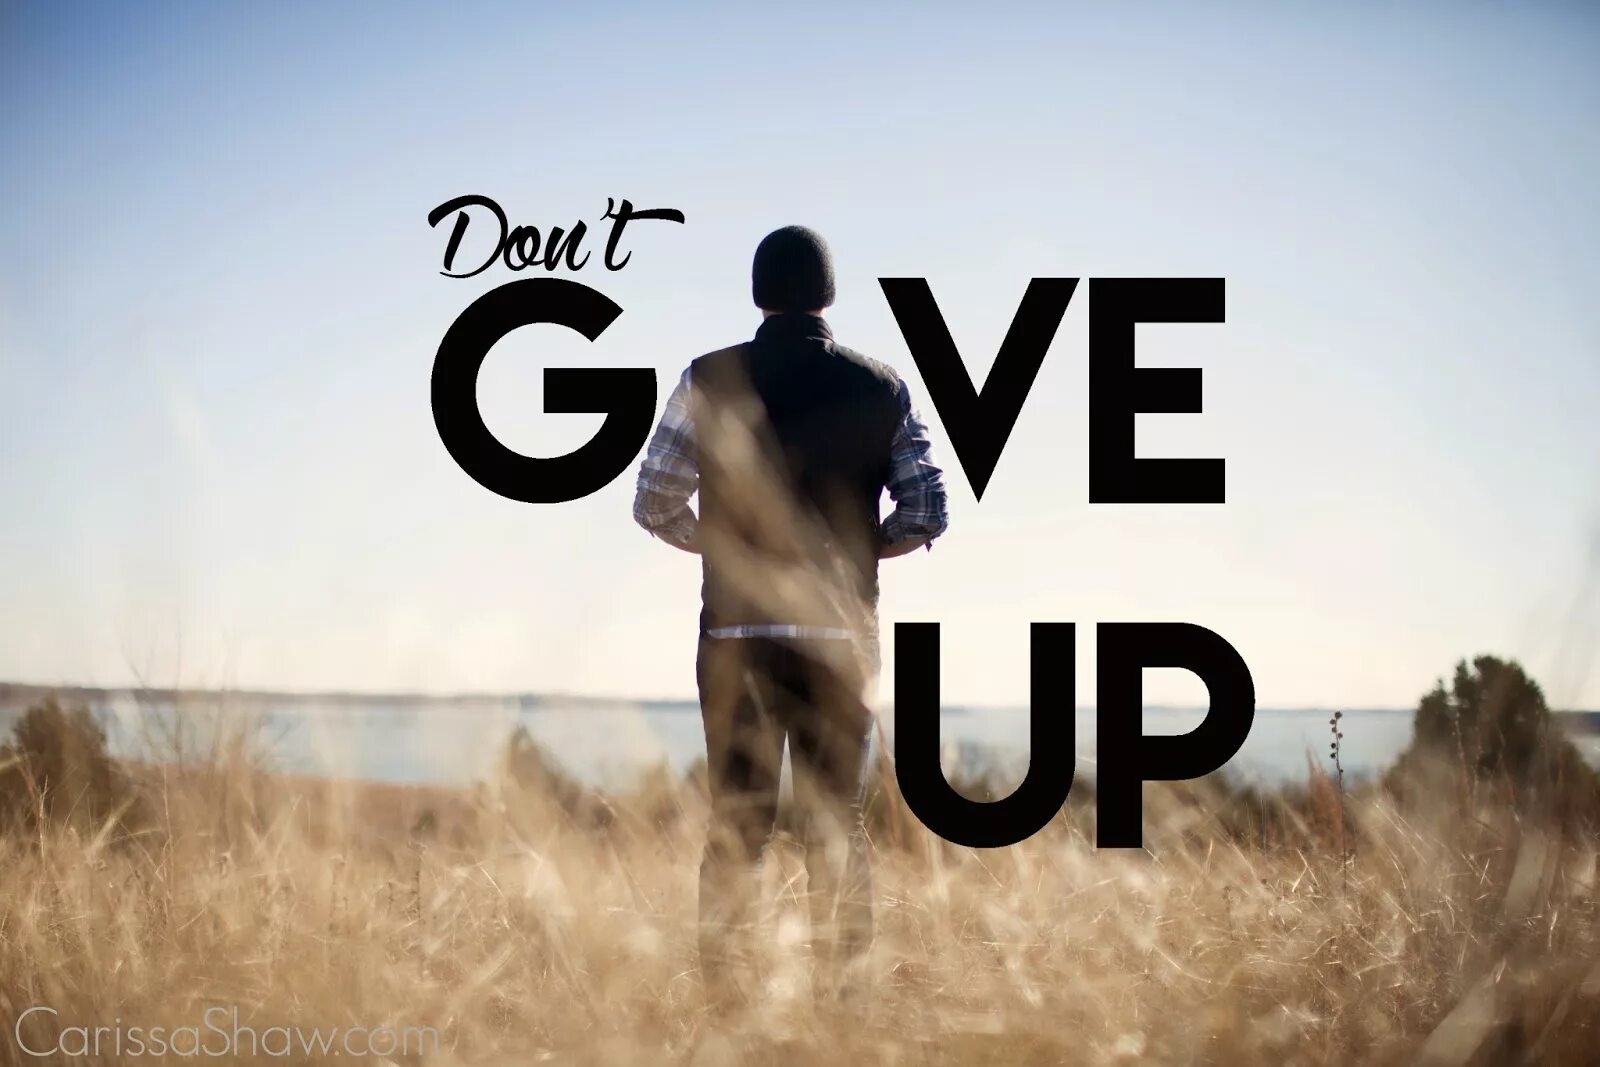 He gave us up. Don`t give up. Don't give up картинка. Надпись don't give up. Never give up картинки.